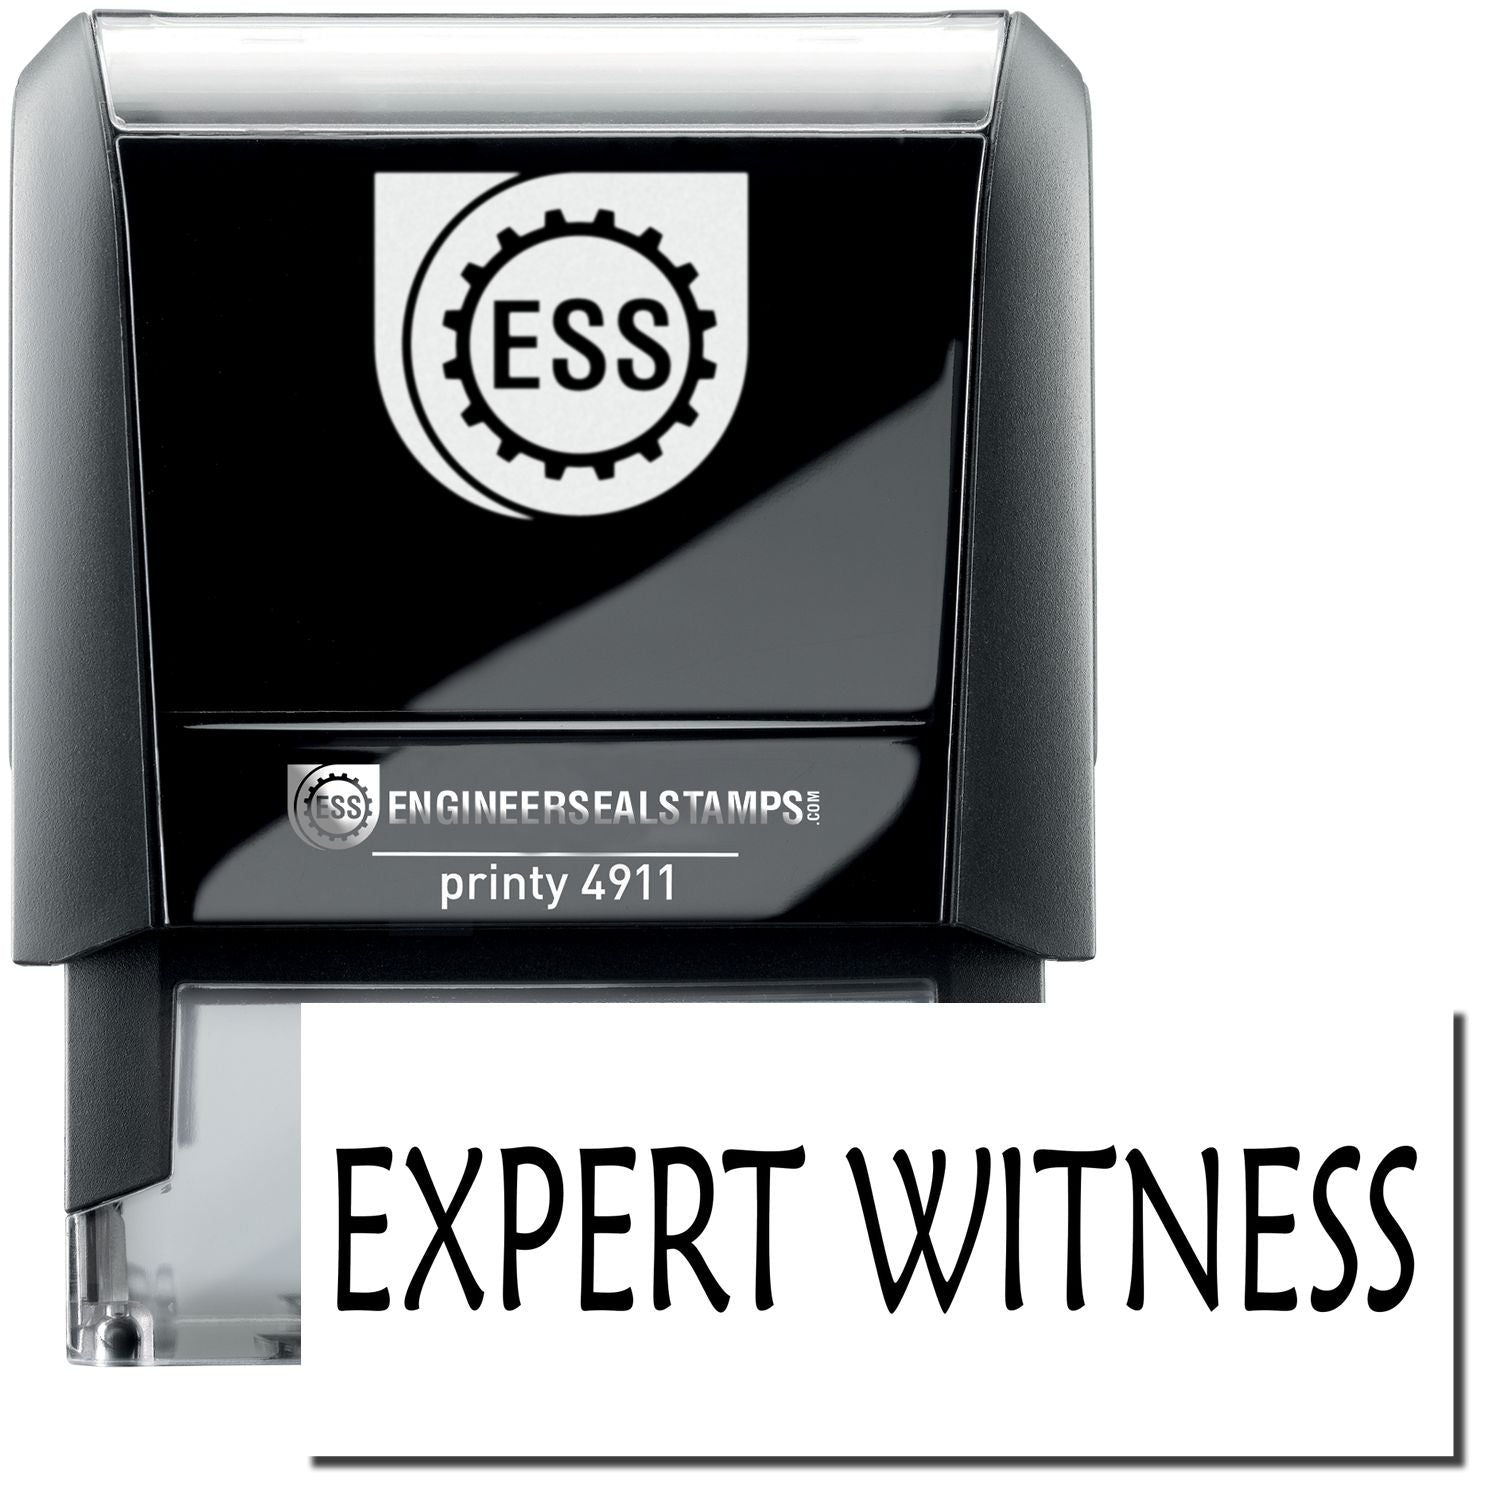 A self-inking stamp with a stamped image showing how the text "EXPERT WITNESS" is displayed after stamping.